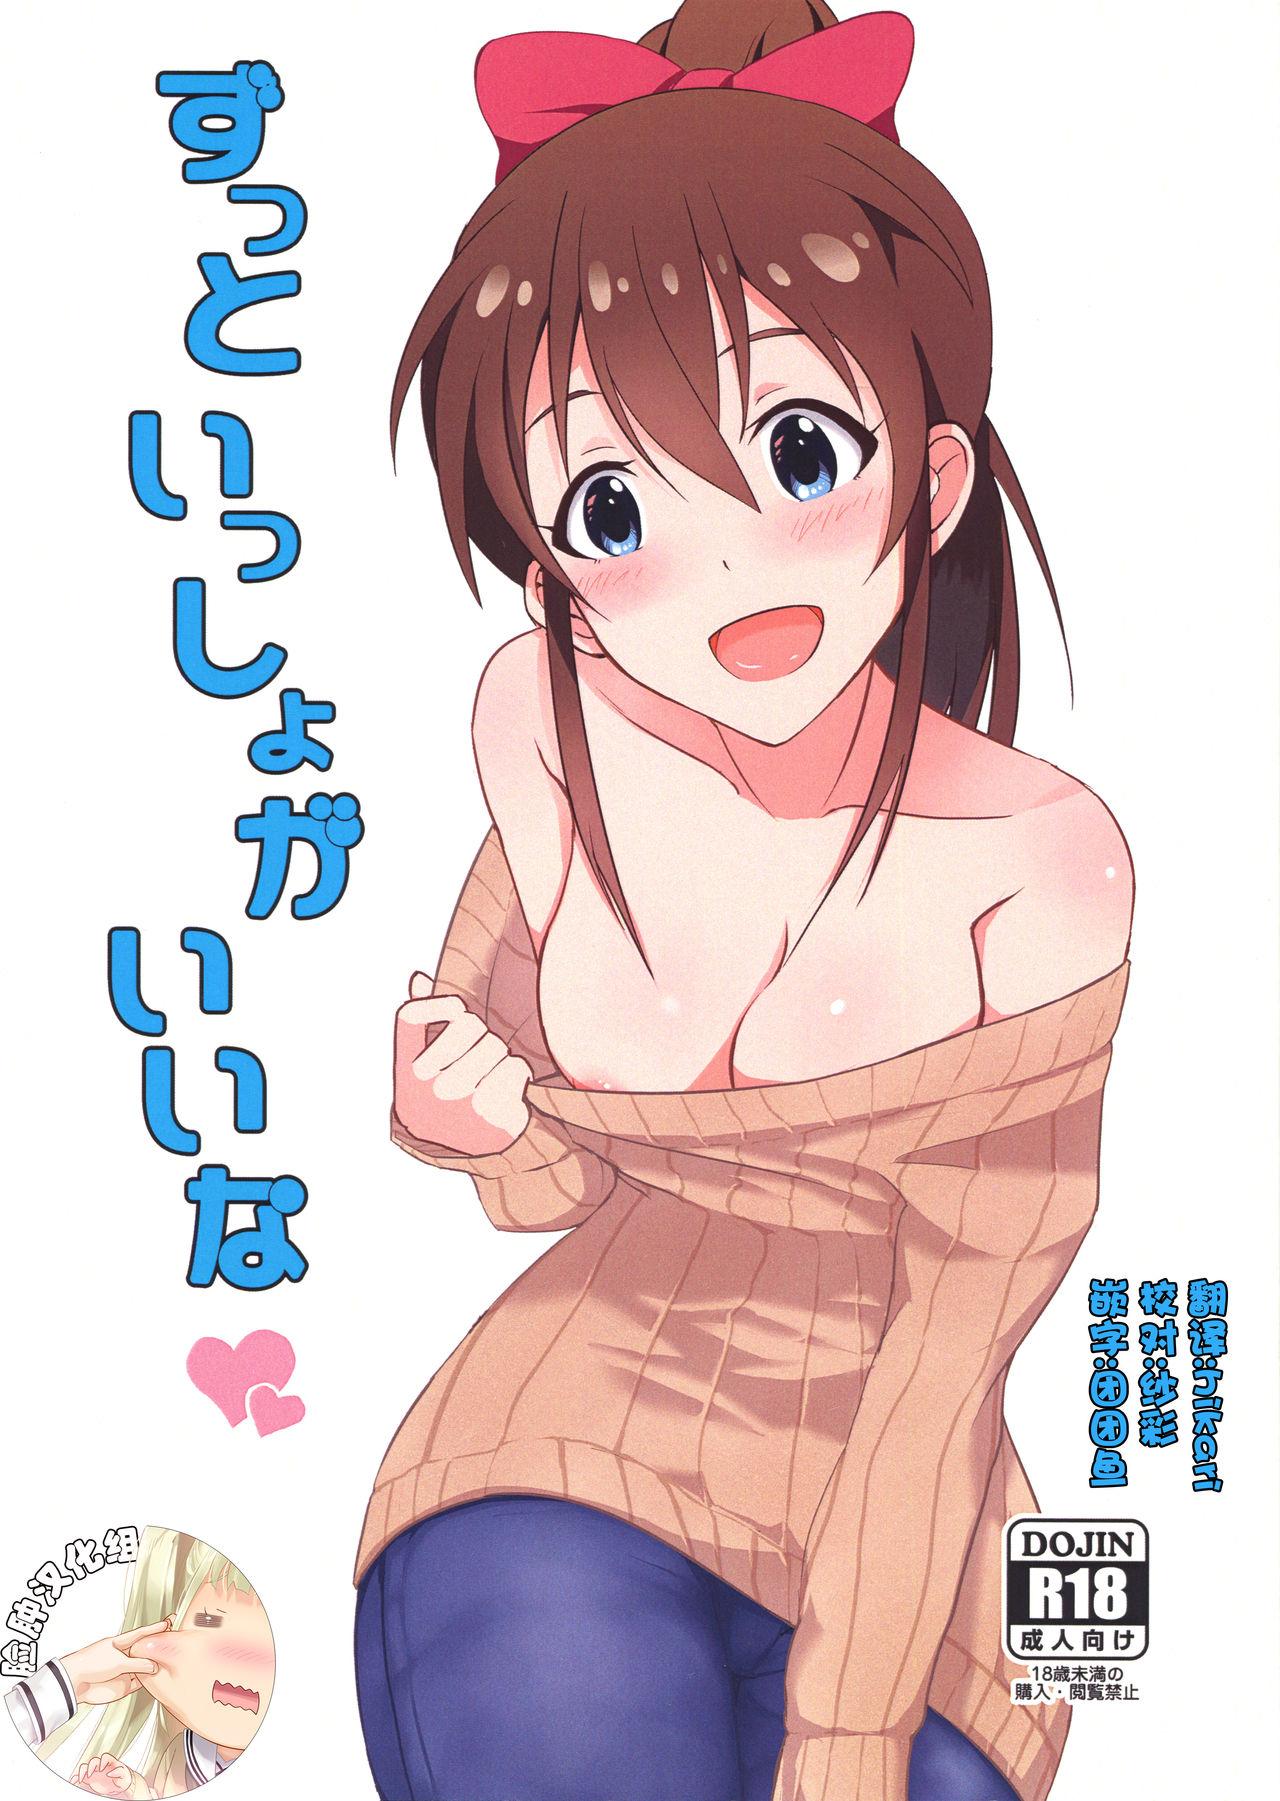 Bed Zutto Issho ga Ii na - The idolmaster Bigcock - Picture 1